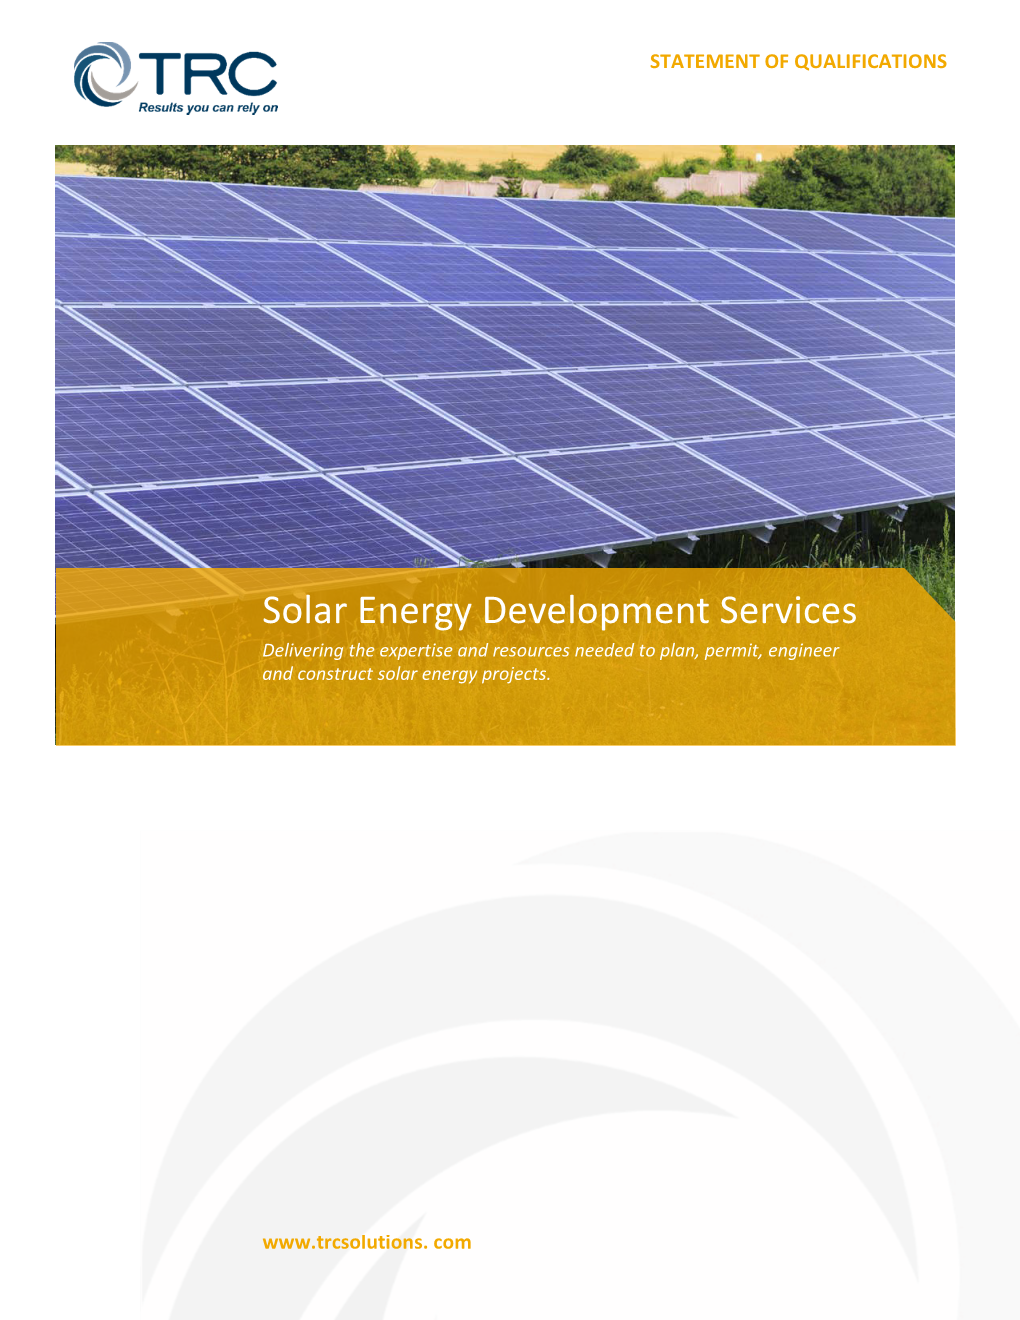 Solar Energy Development Services Delivering the Expertise and Resources Needed to Plan, Permit, Engineer and Construct Solar Energy Projects